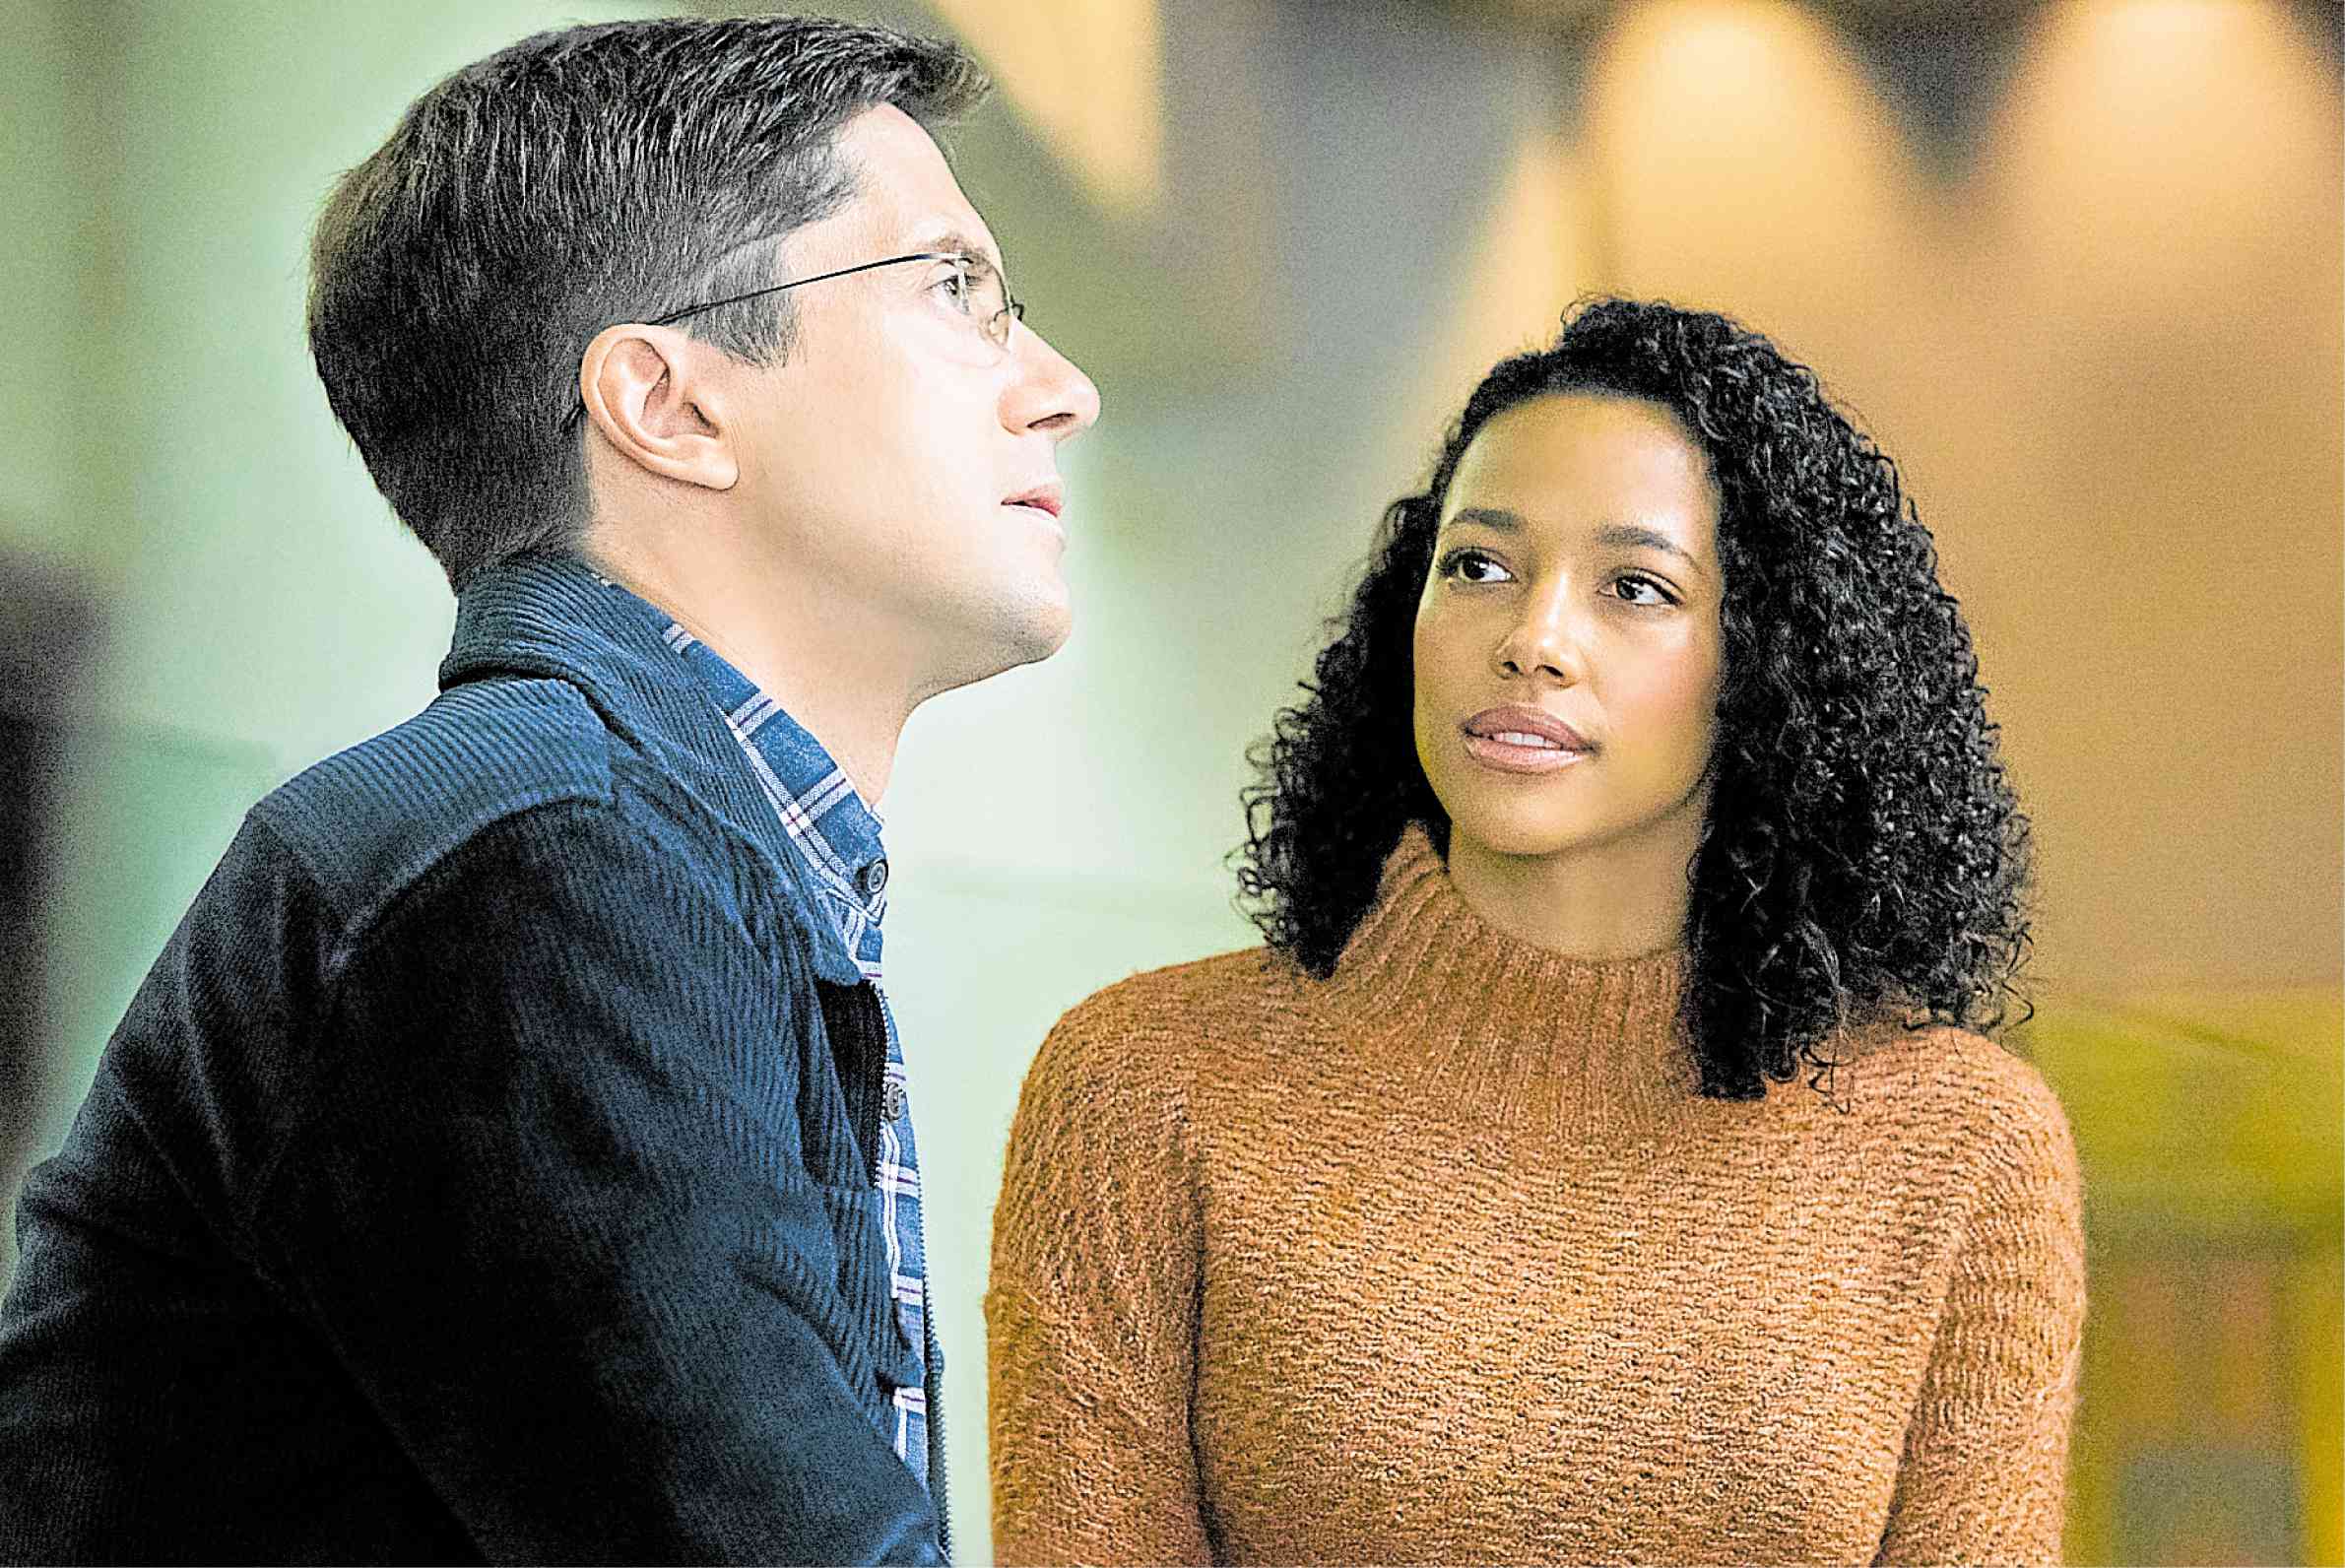 Topher Grace (left) and Kylie Bunbury in “Try, Try”